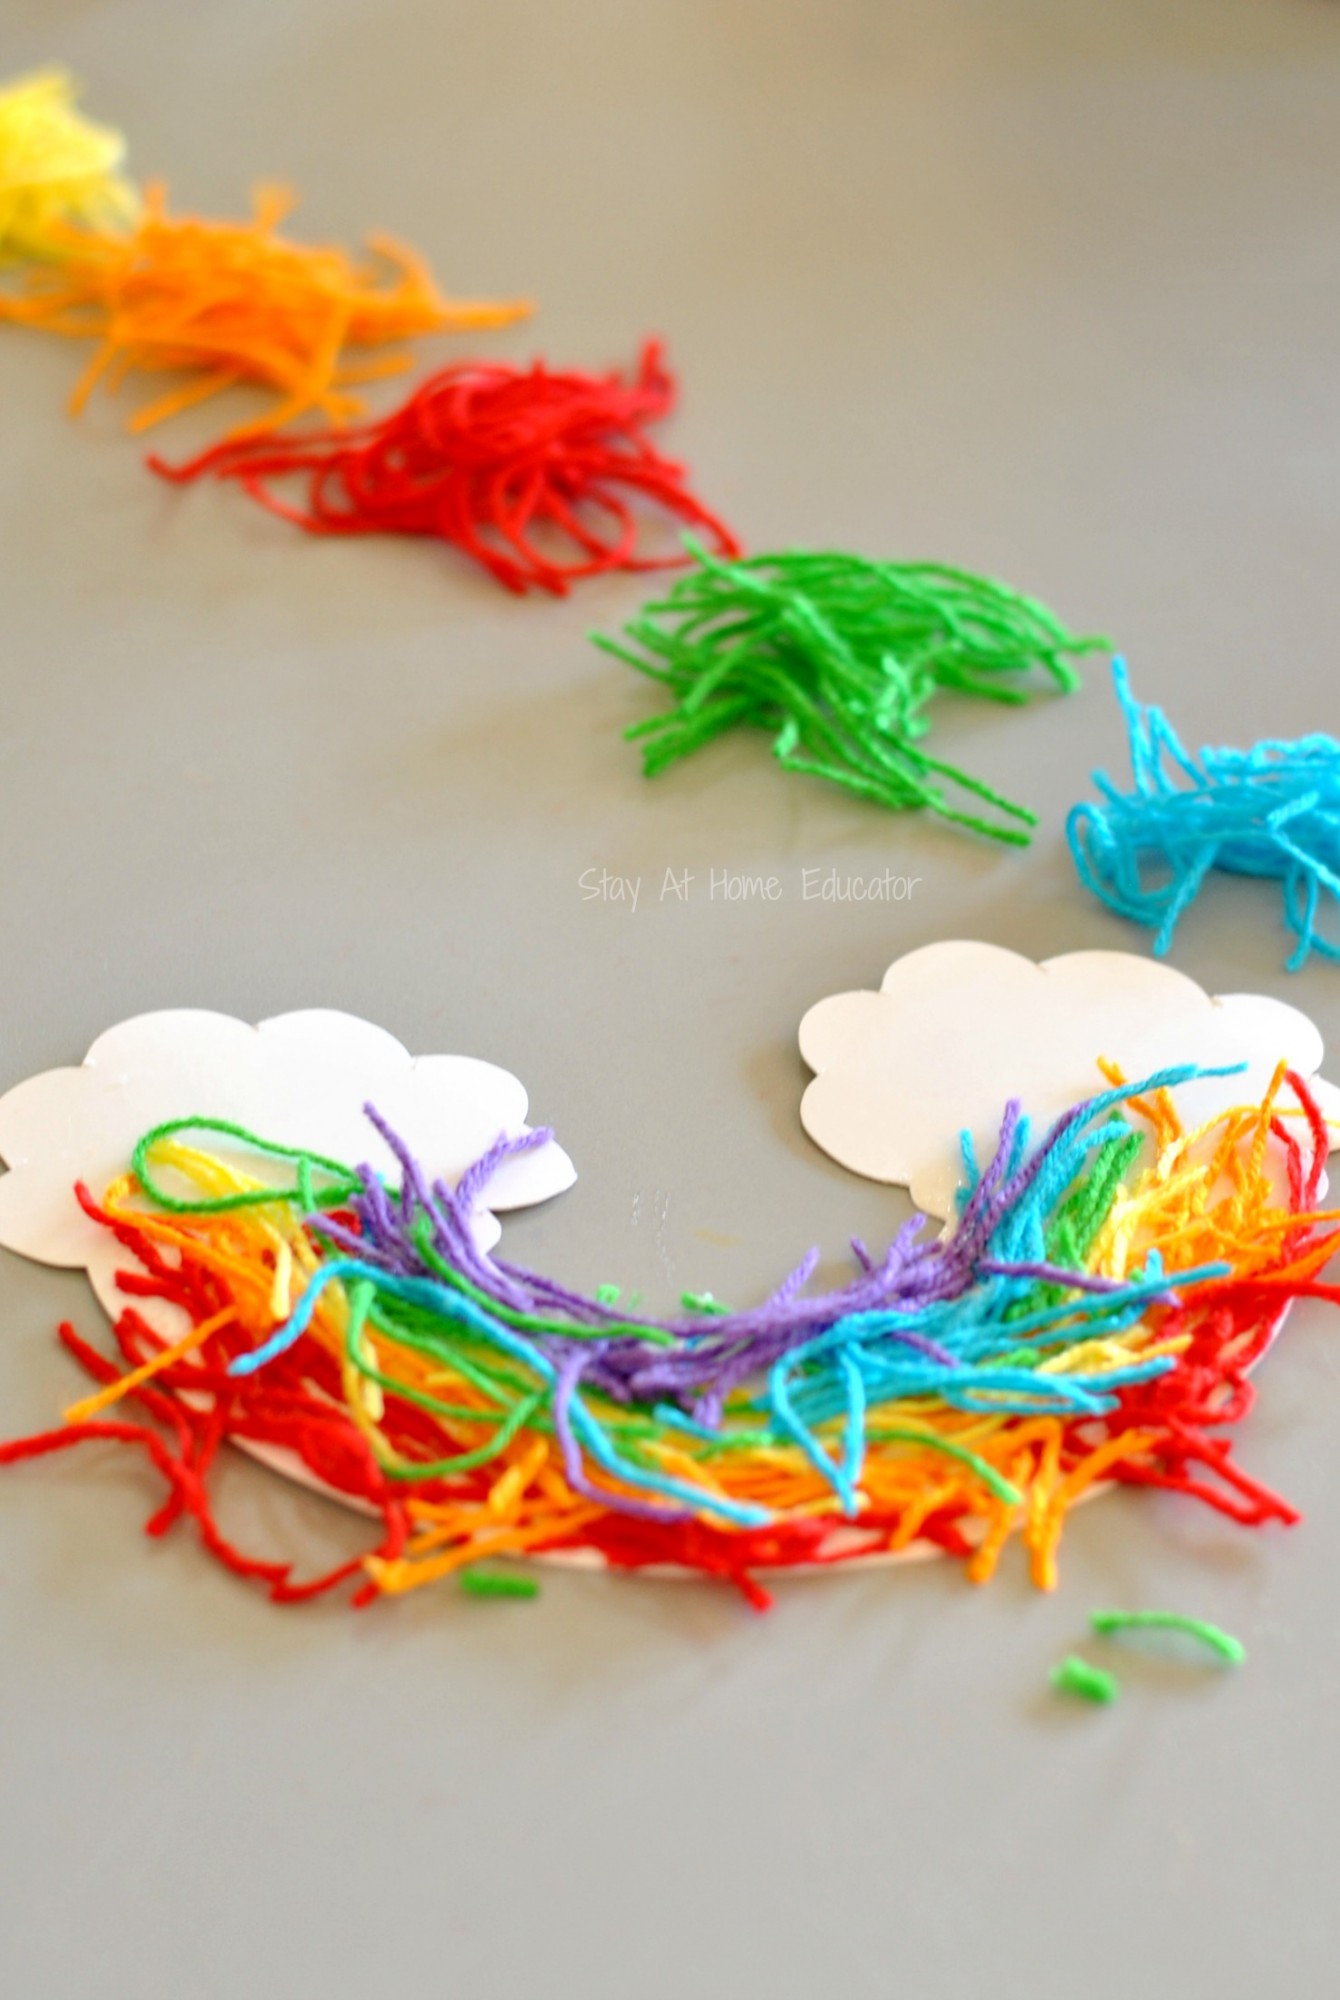 Rainbow craft for preschoolers - Snipped yarn rainbows, a fine motor craft for preschoolers  - work on hand strength, fine motor skills, and scissor cutting practice while doing a rainbow craft for preschoolers. Add it to your st. Patrick's Day lesson plans